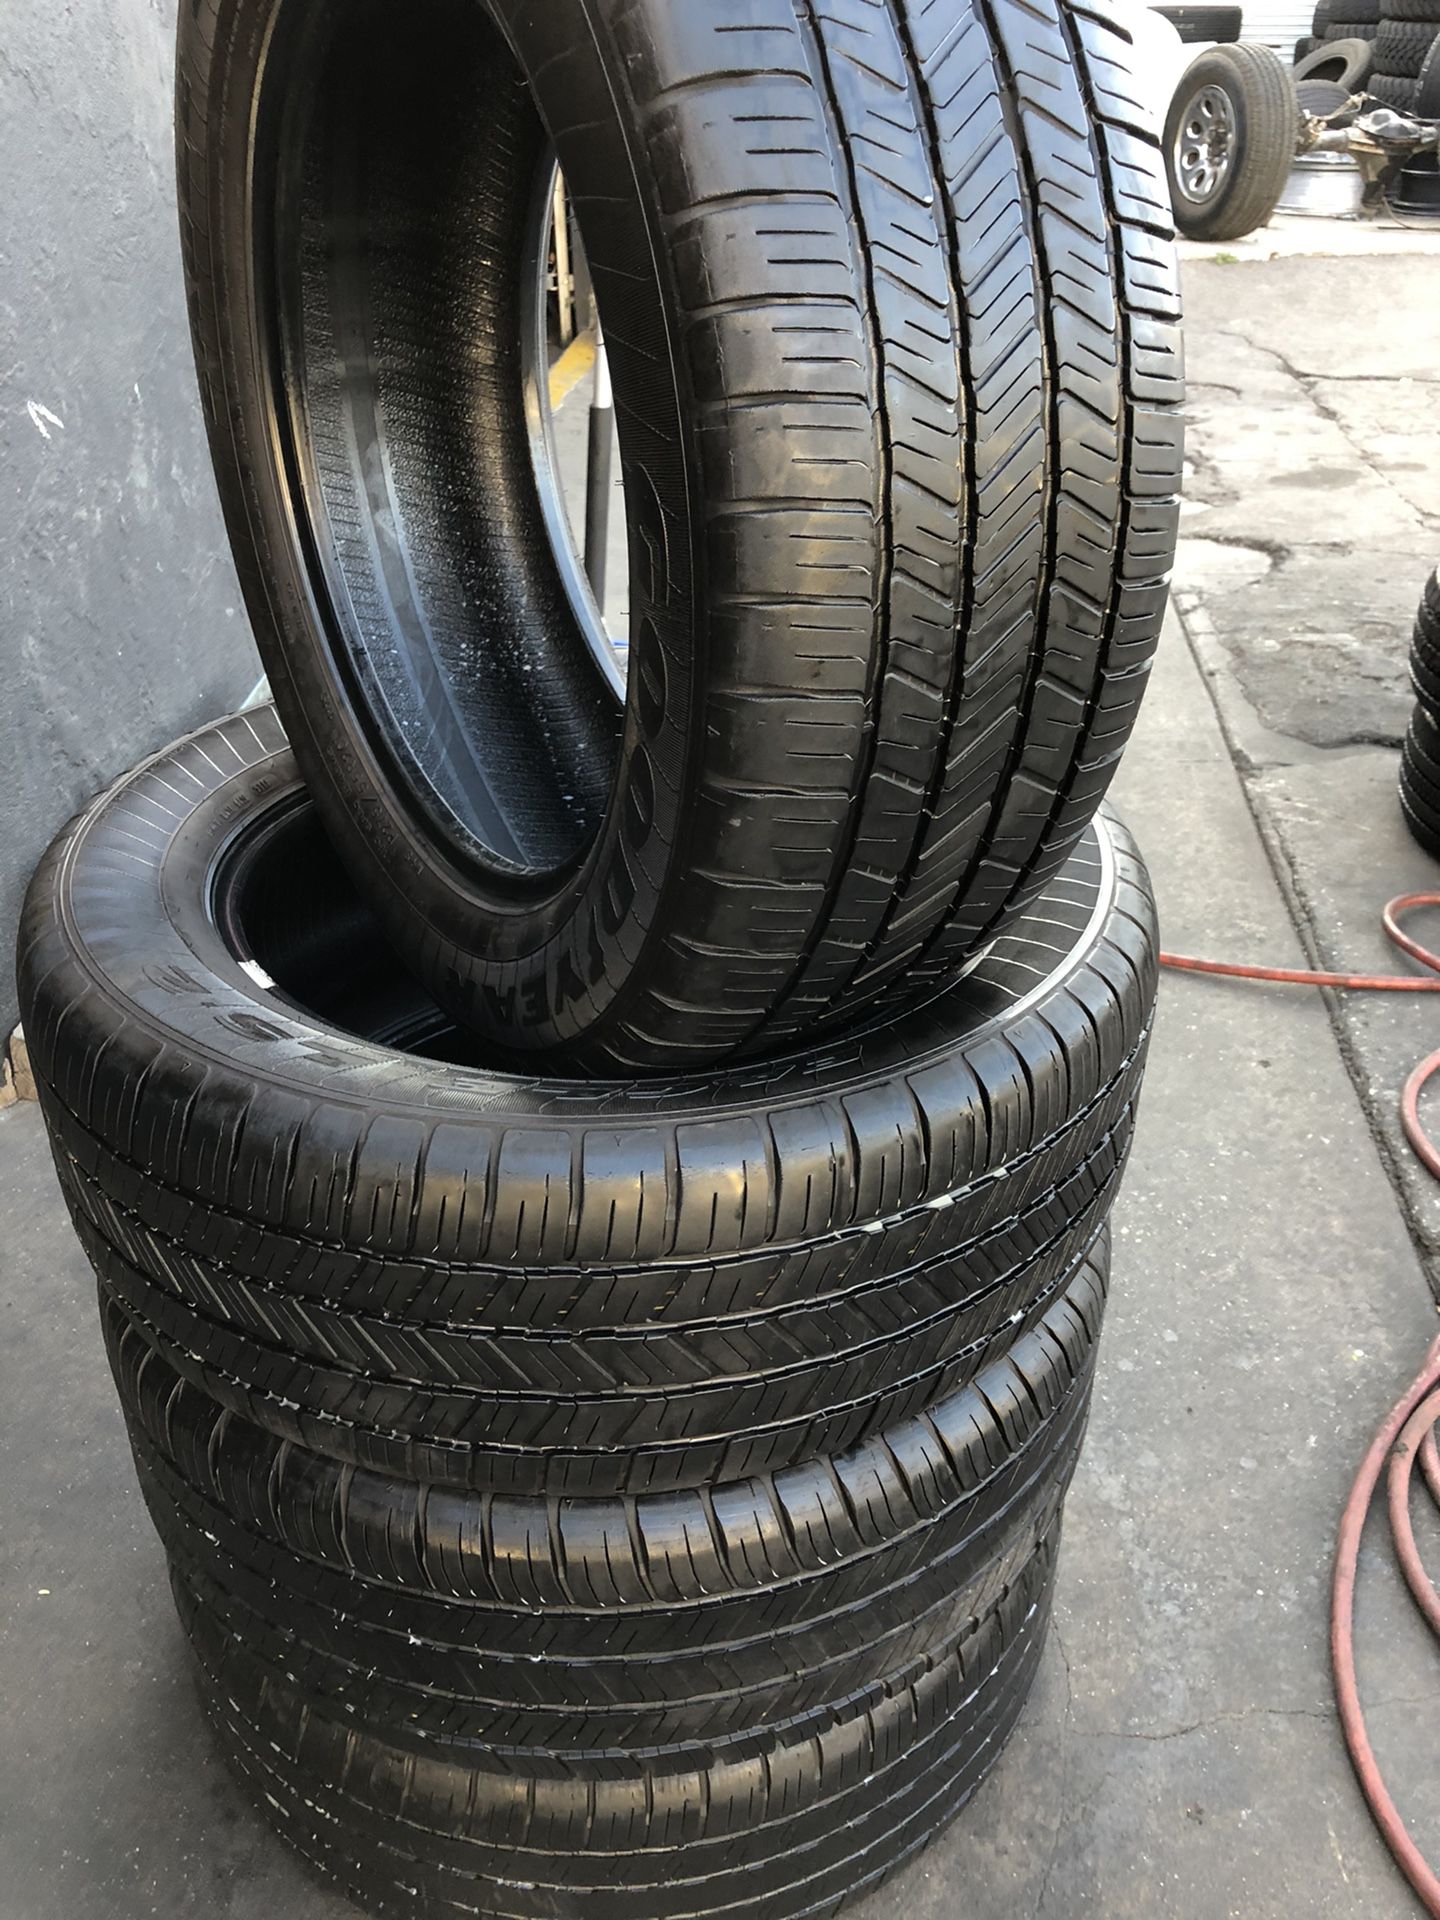 275/55R20 GoodYear tires (4 for $280)